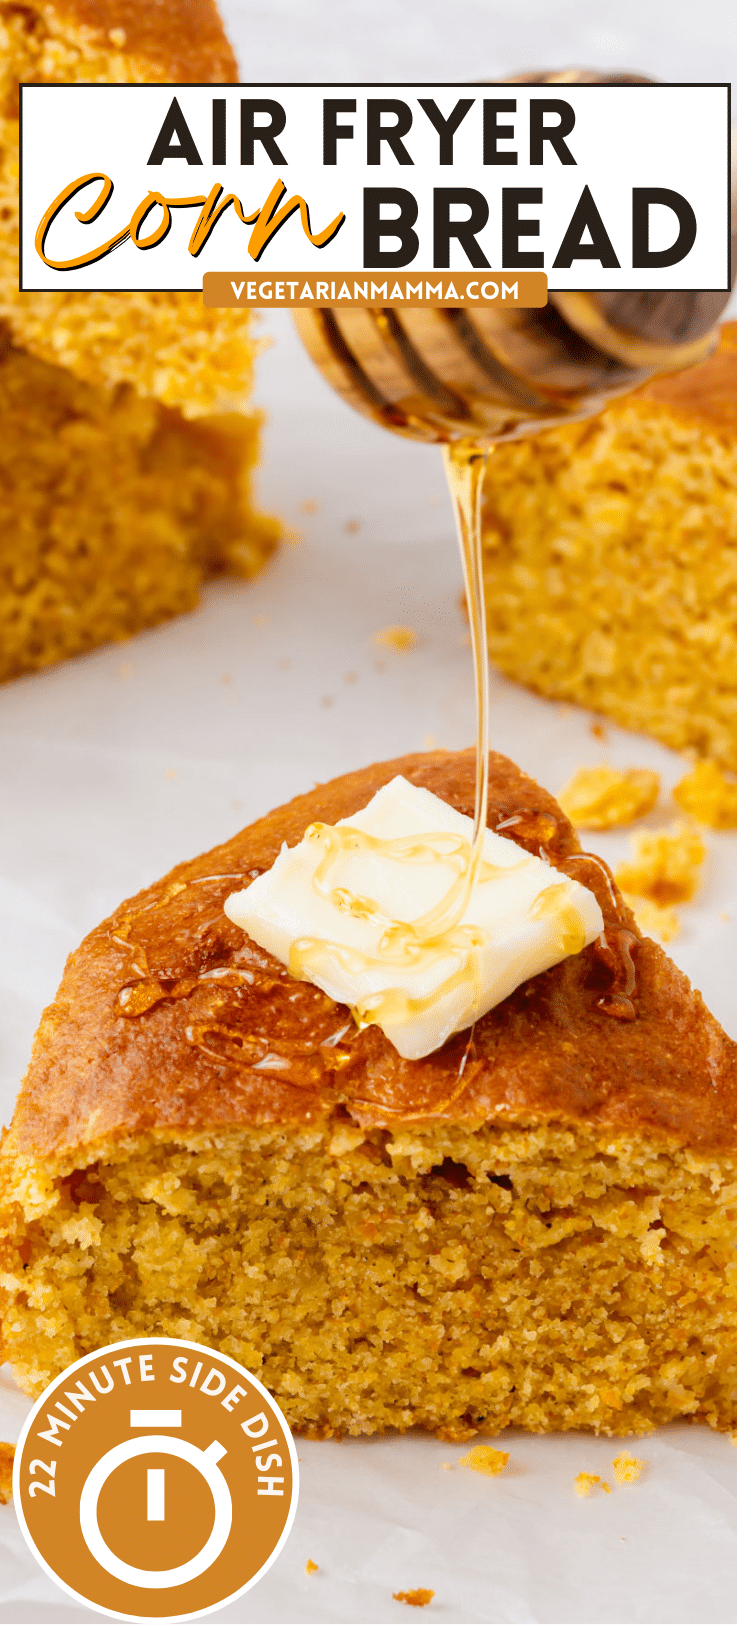 This air fryer cornbread is made with common ingredients and is the perfect balance of sweet and tender! Air Fryer Cornbread is fantastic with chilis in the fall and is a great addition to your game-day spread!